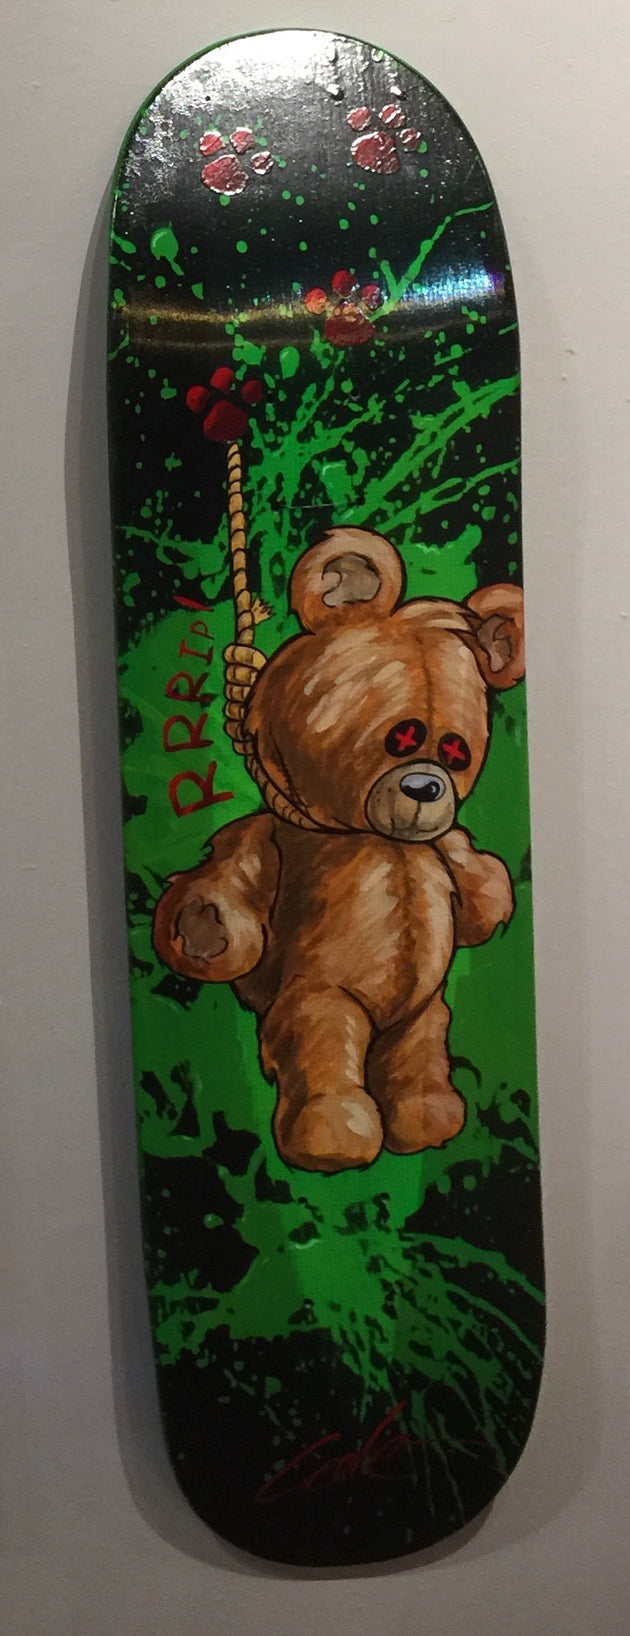 "Teddy Suicide" by James Cole  $375